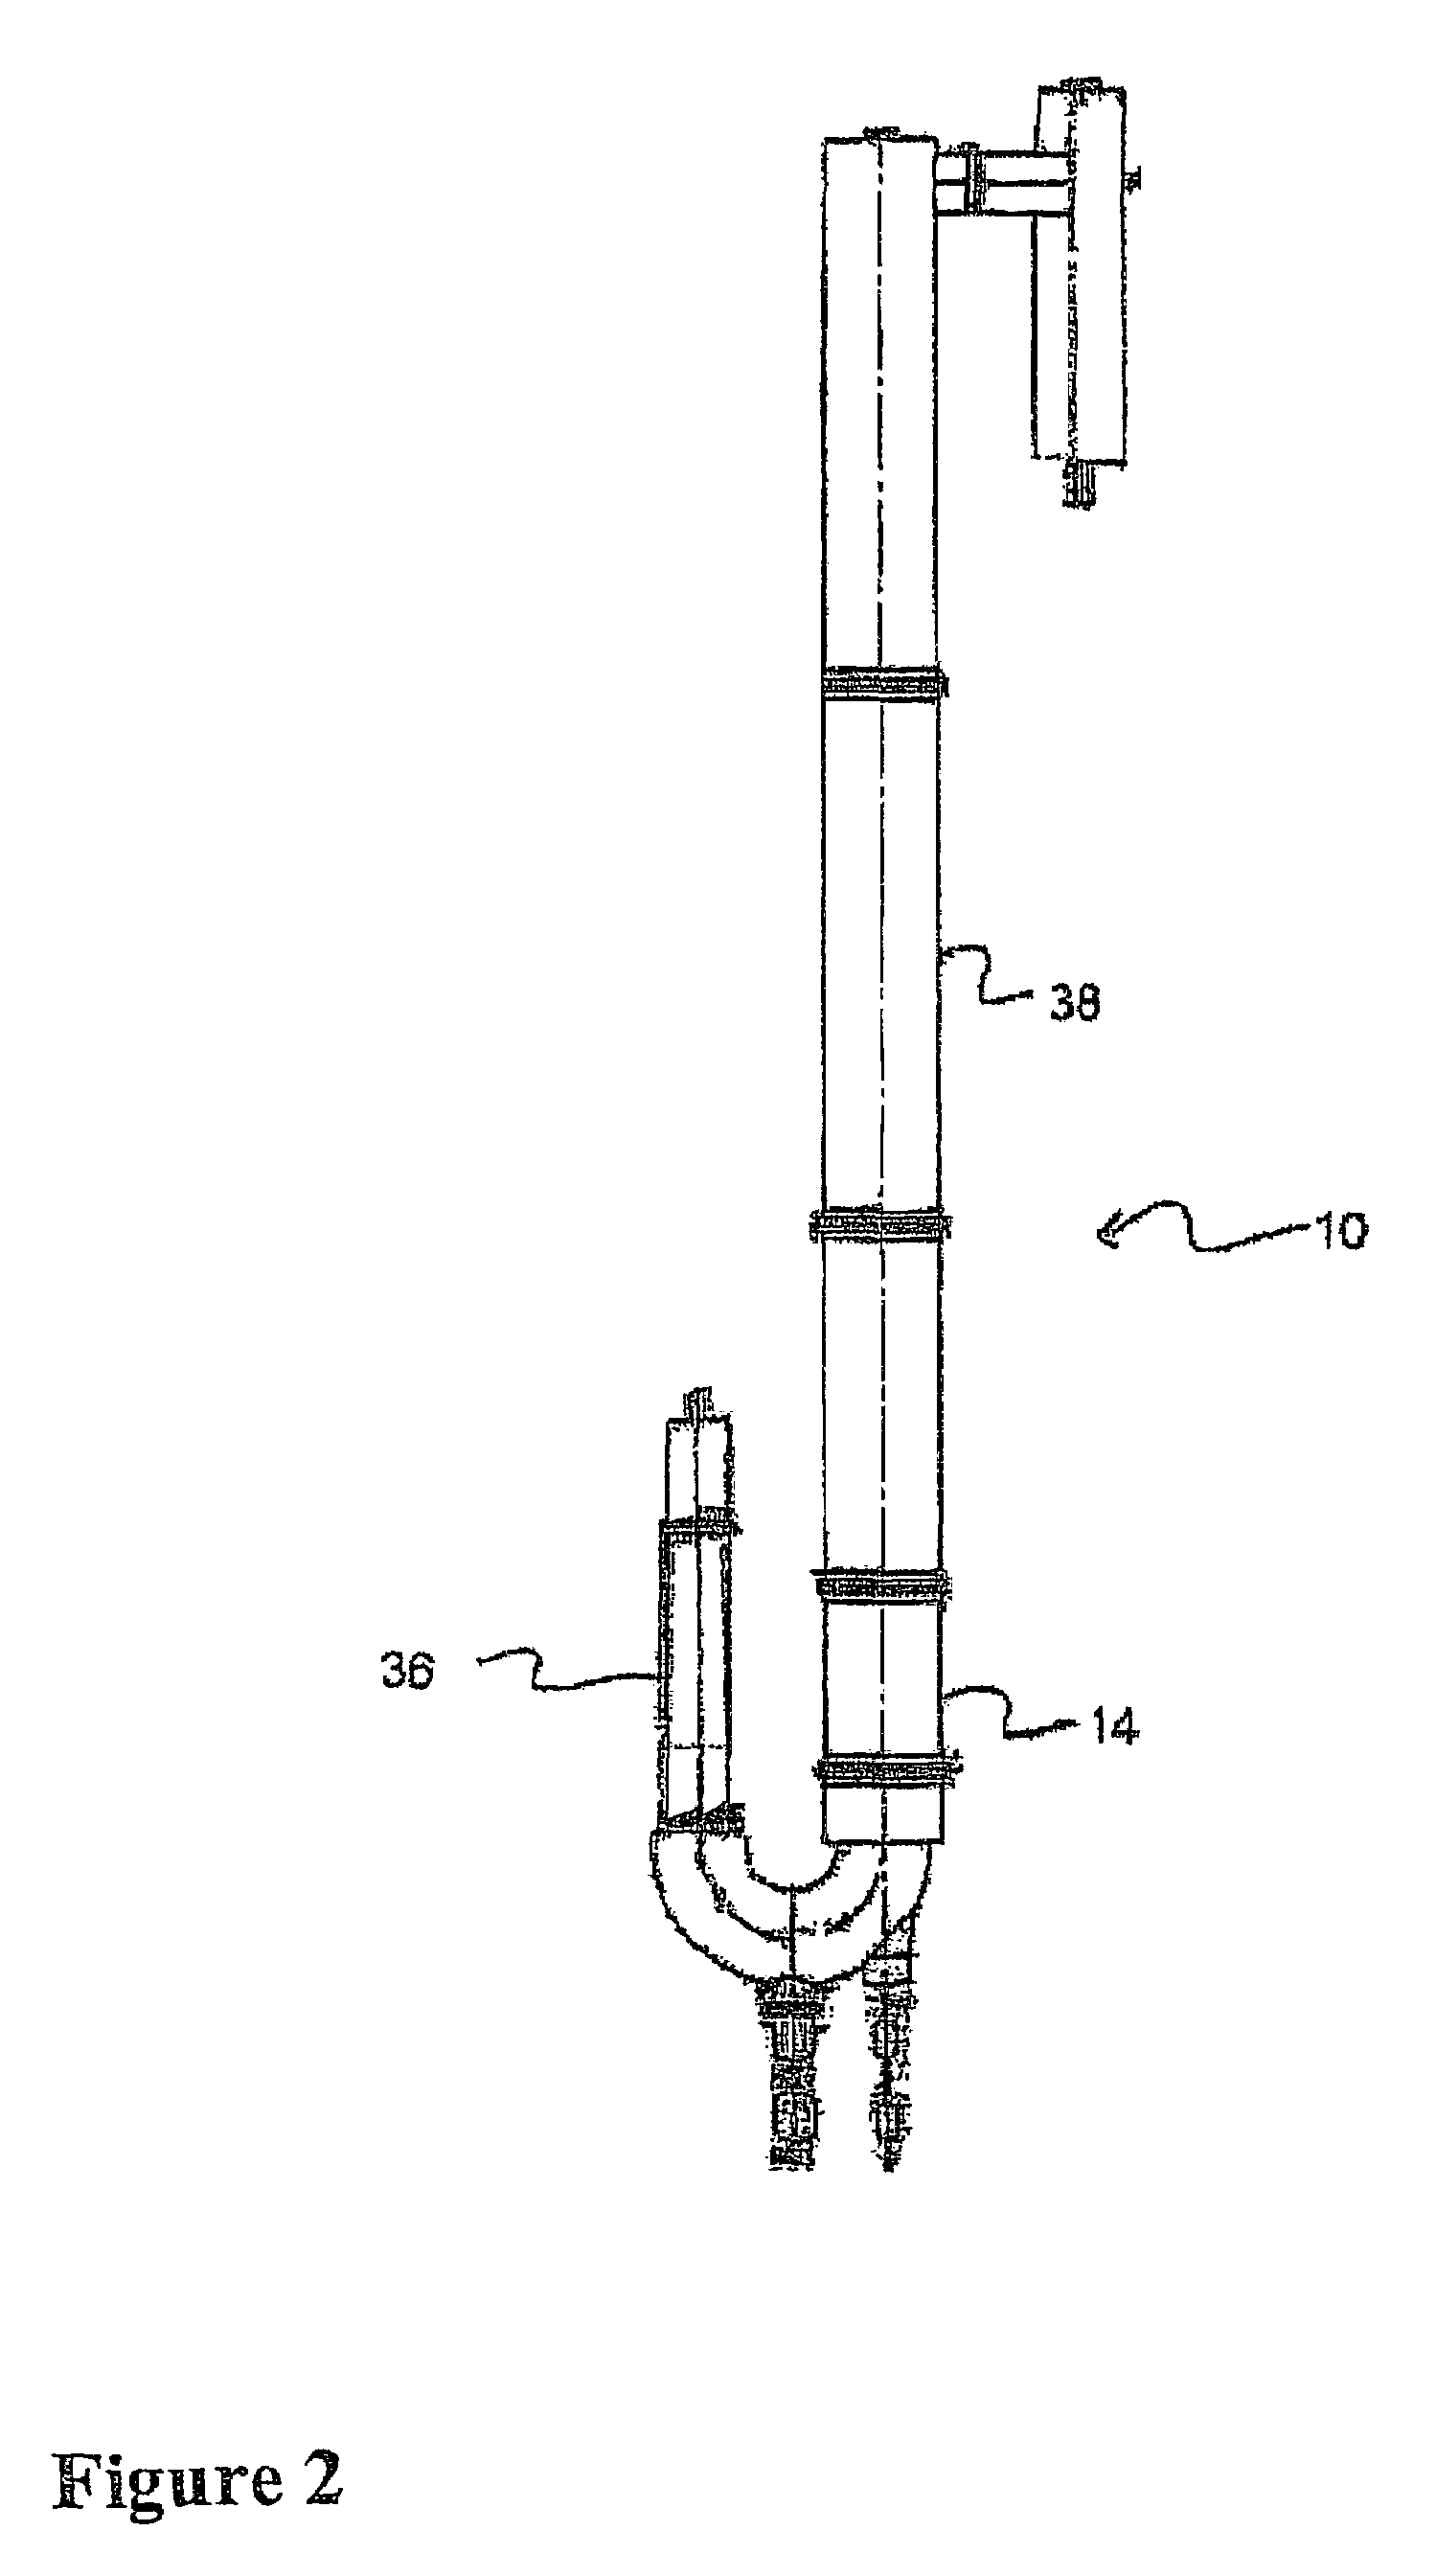 Pulse gasification and hot gas cleanup apparatus and process